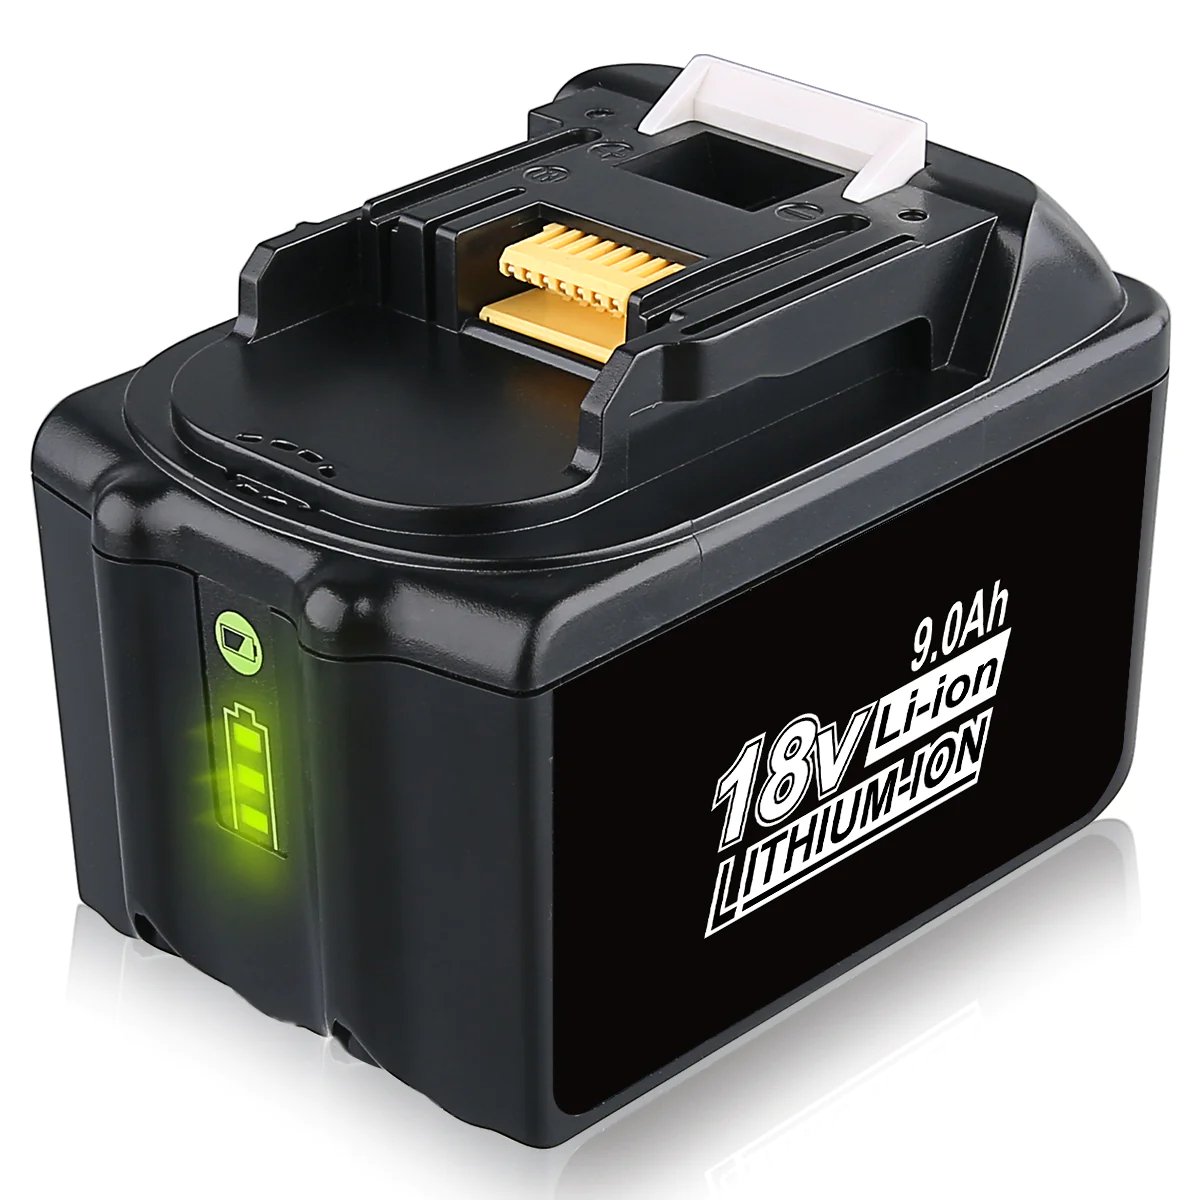 18V 9AH BL1890B replacement battery for Makita with LED/compatible with  Makita 18V BL1830B BL1860B BL1820 LXT-400